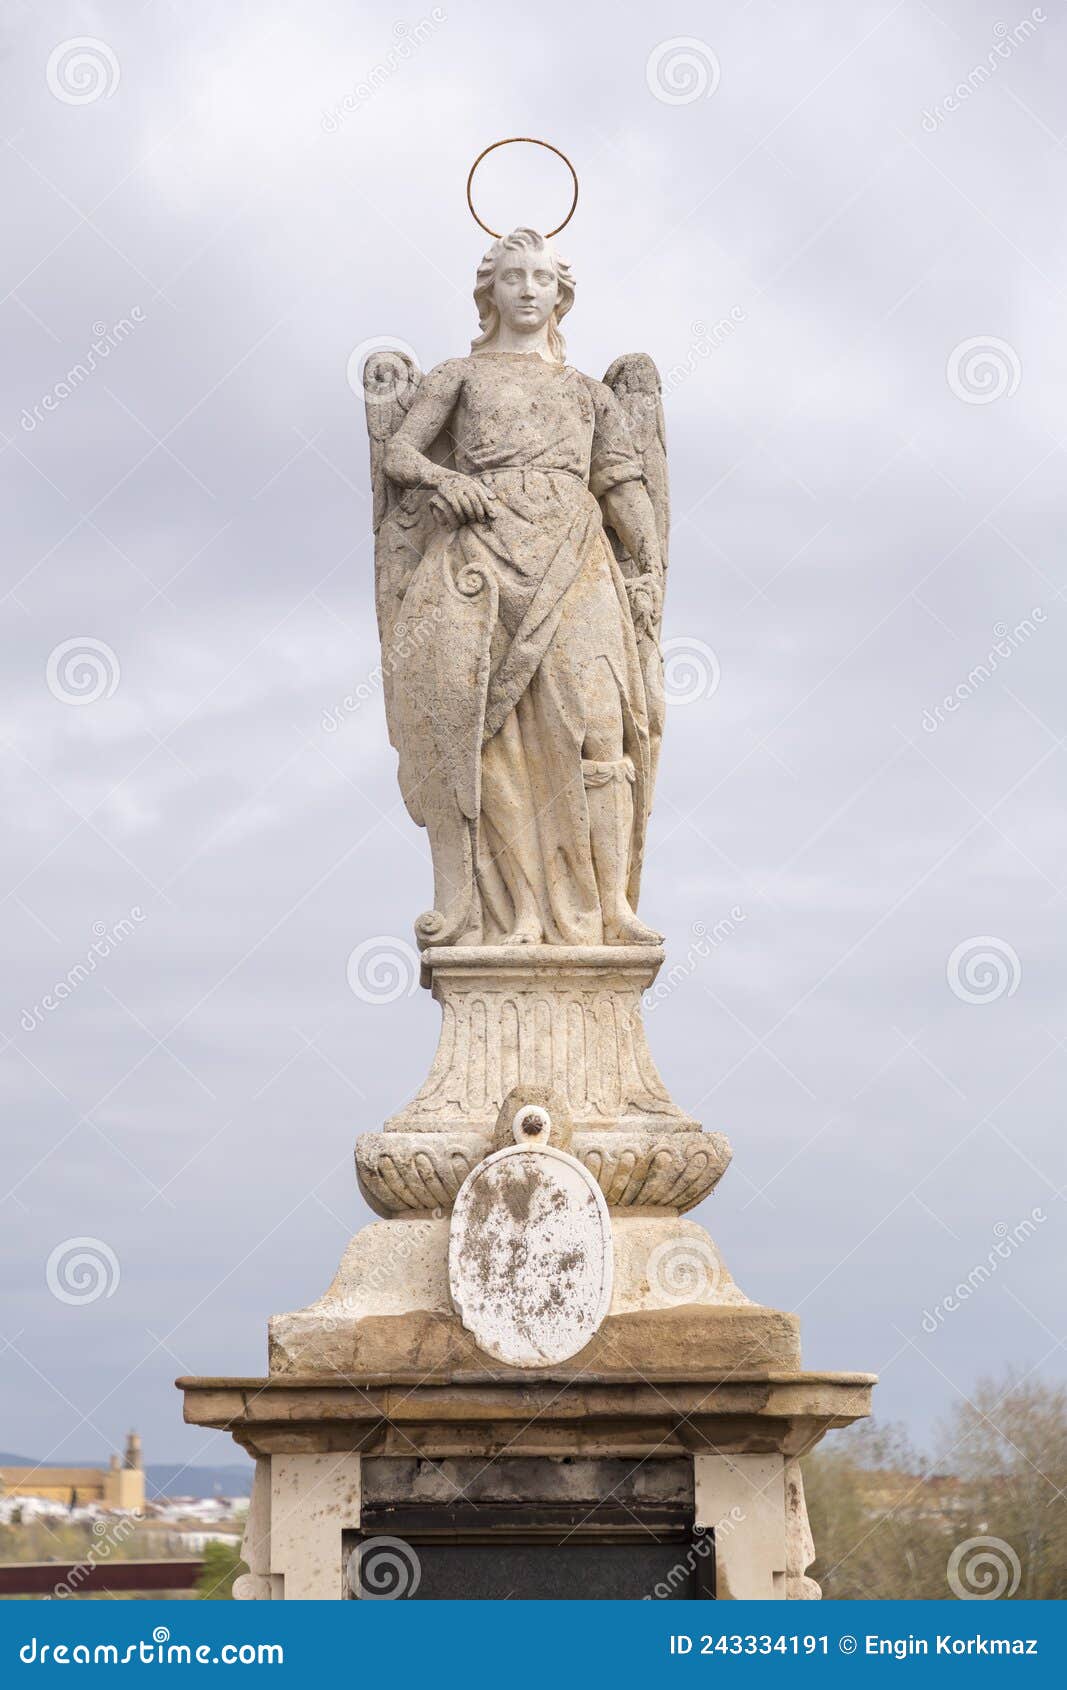 statue of saint raphael in the middle of the roman bridge in cordoba, spain